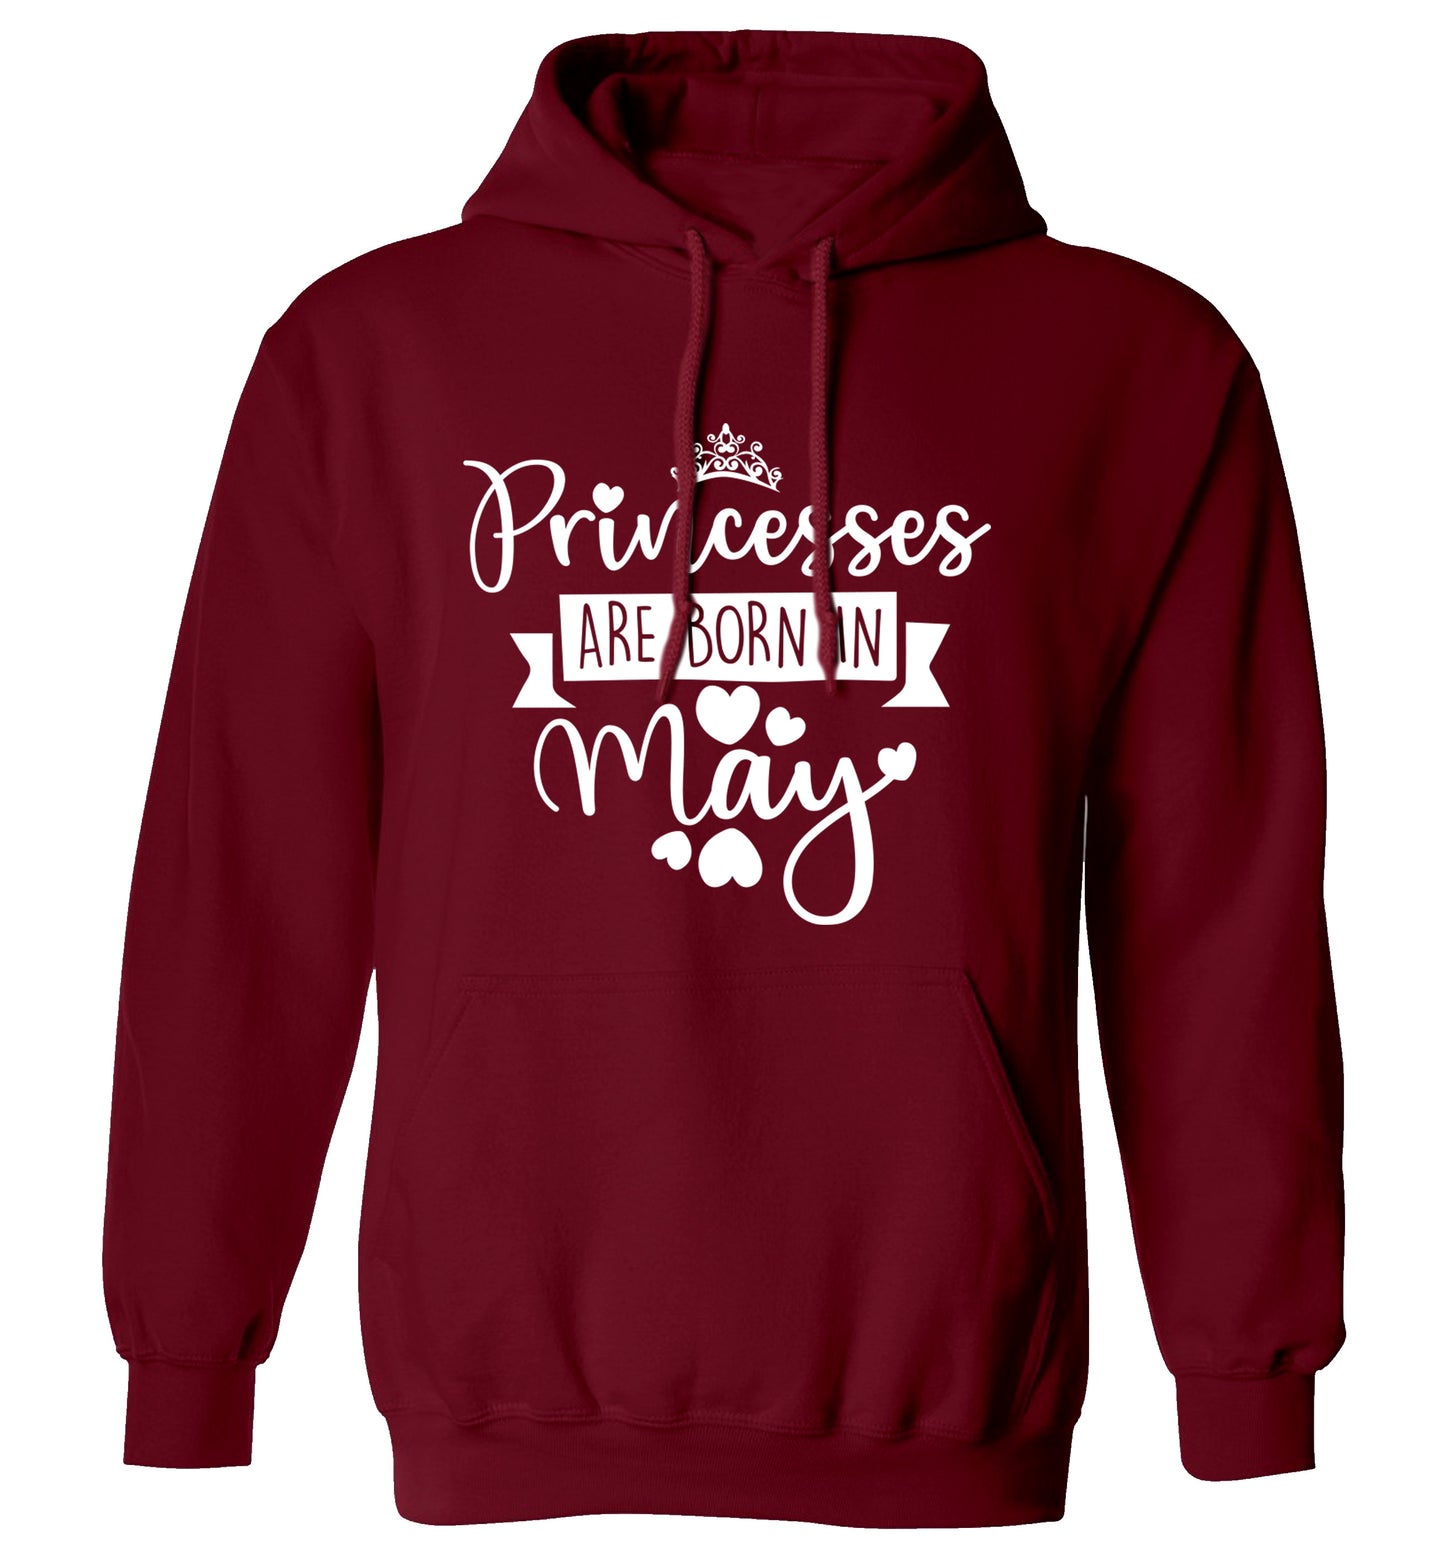 Princesses are born in May adults unisex maroon hoodie 2XL